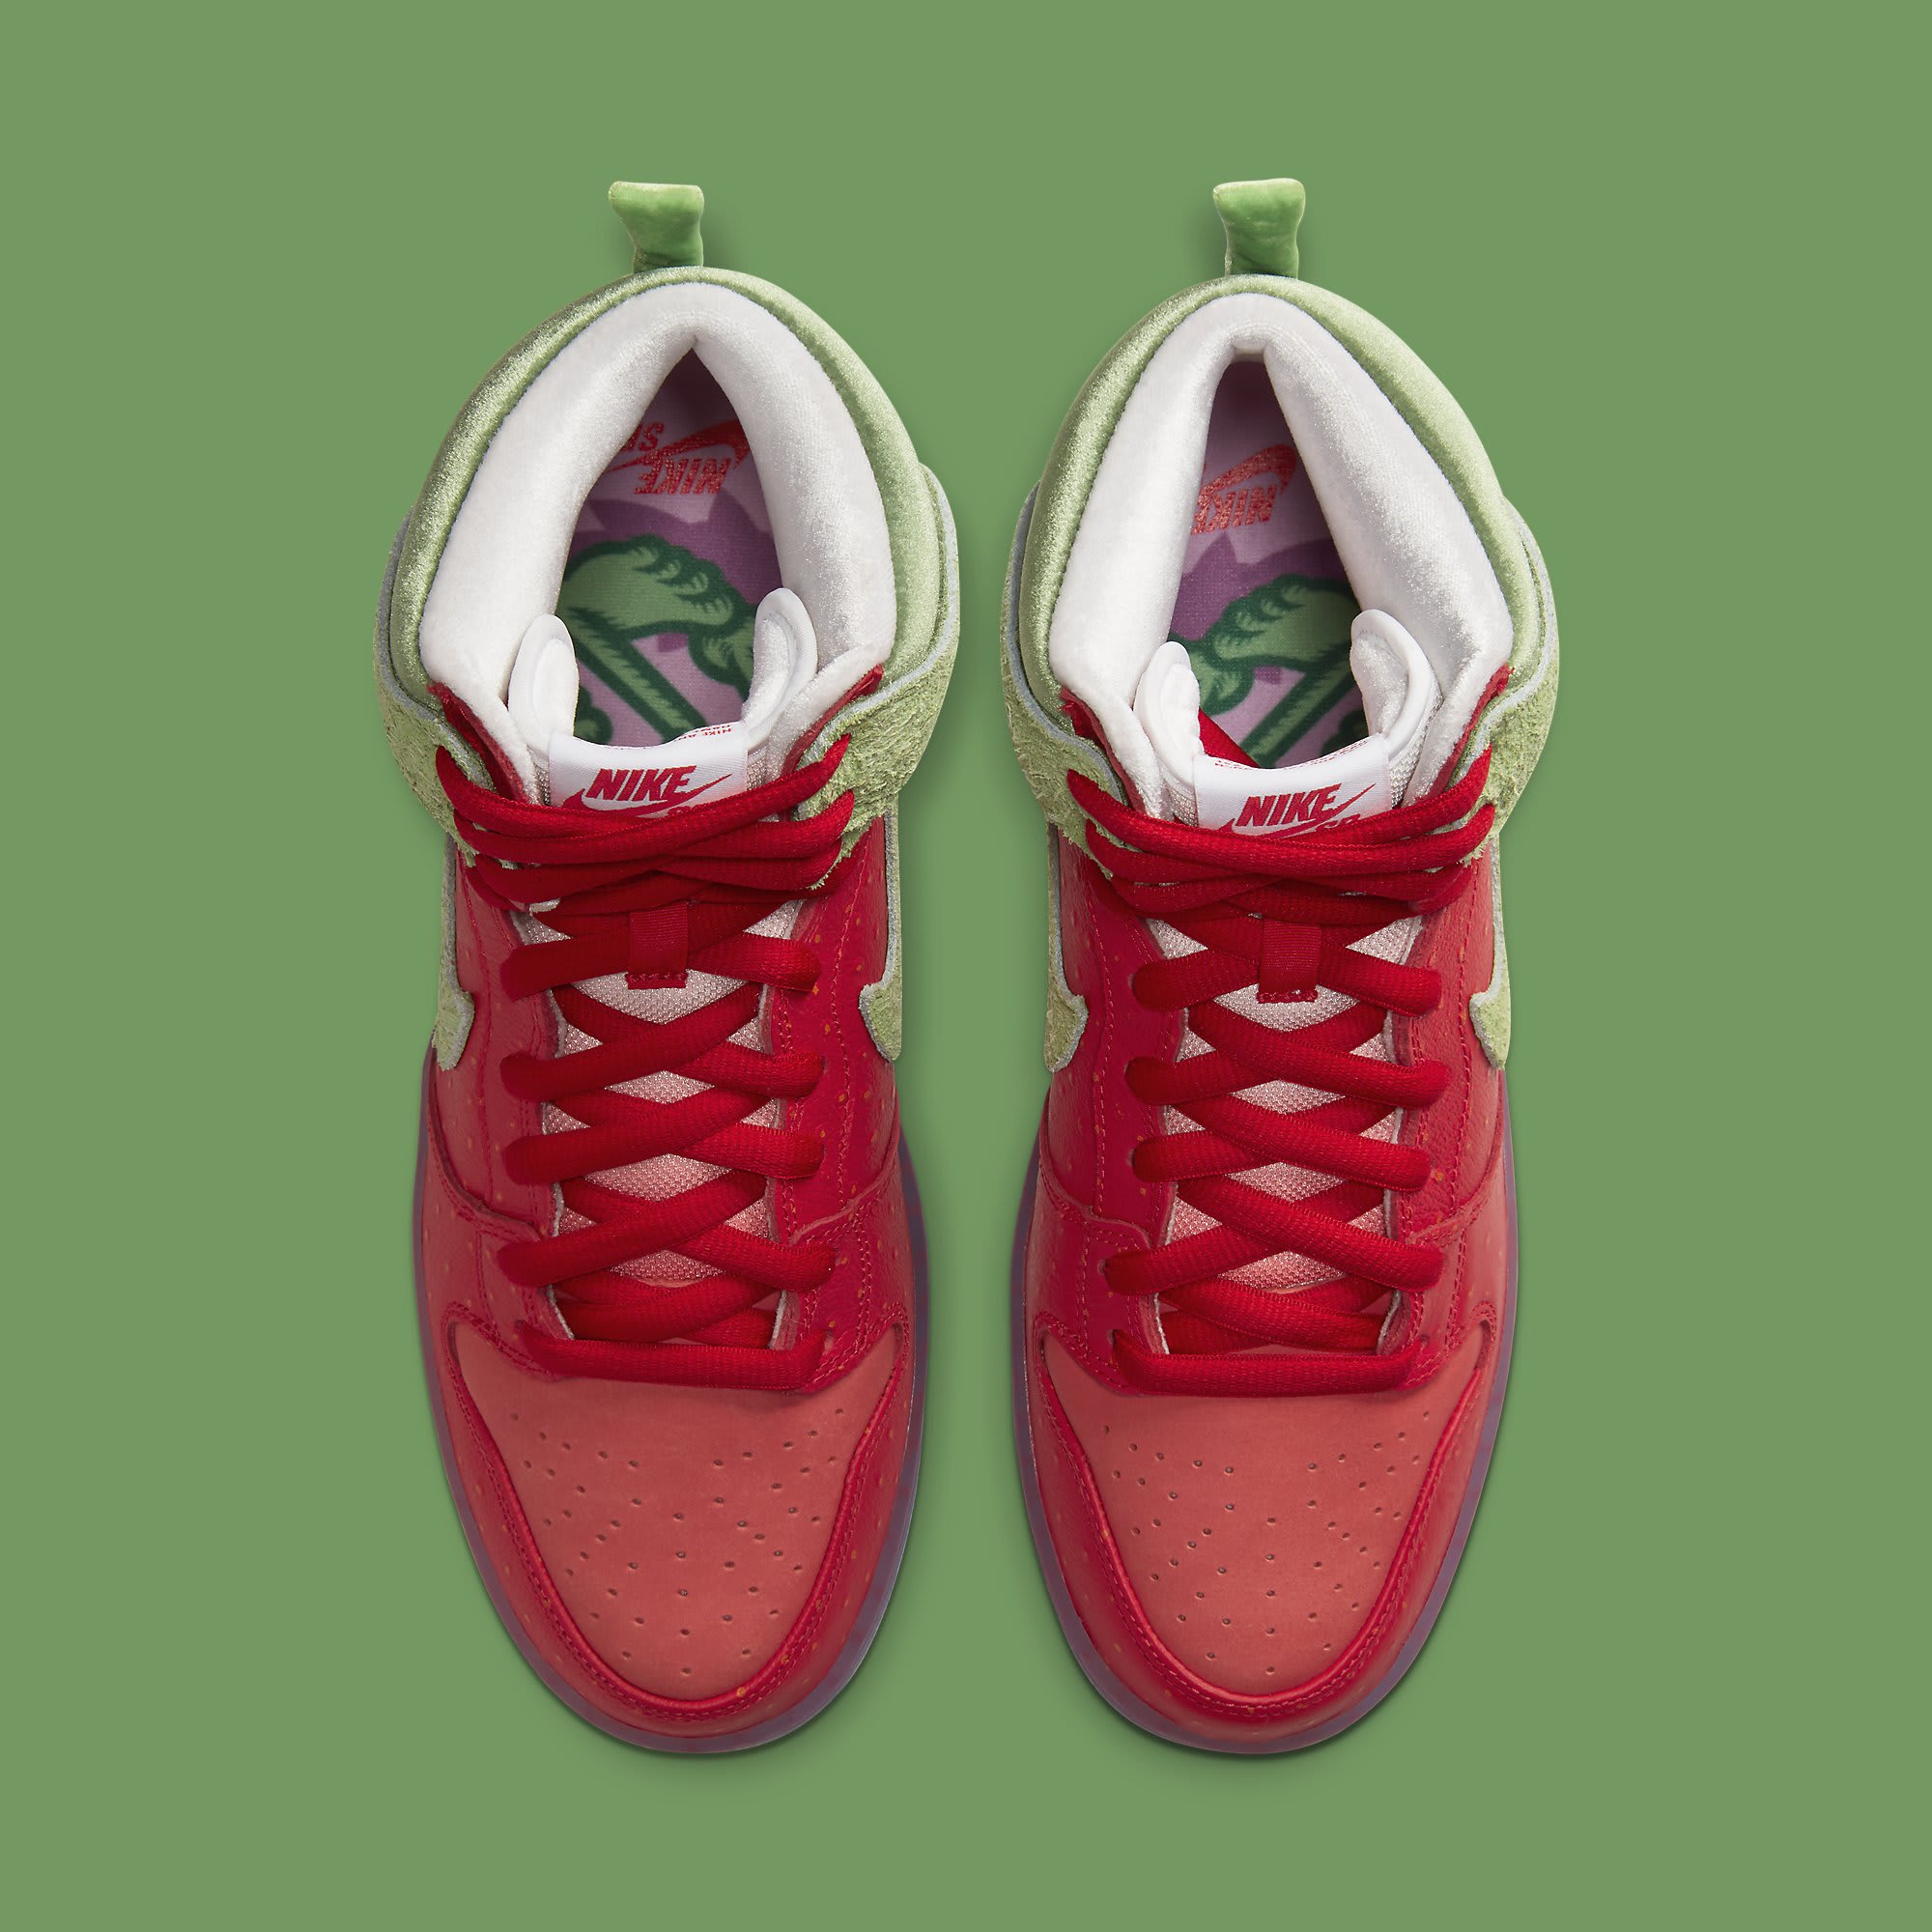 Strawberry Cough x Nike SB Dunk High SW7093-600 Release Date Top